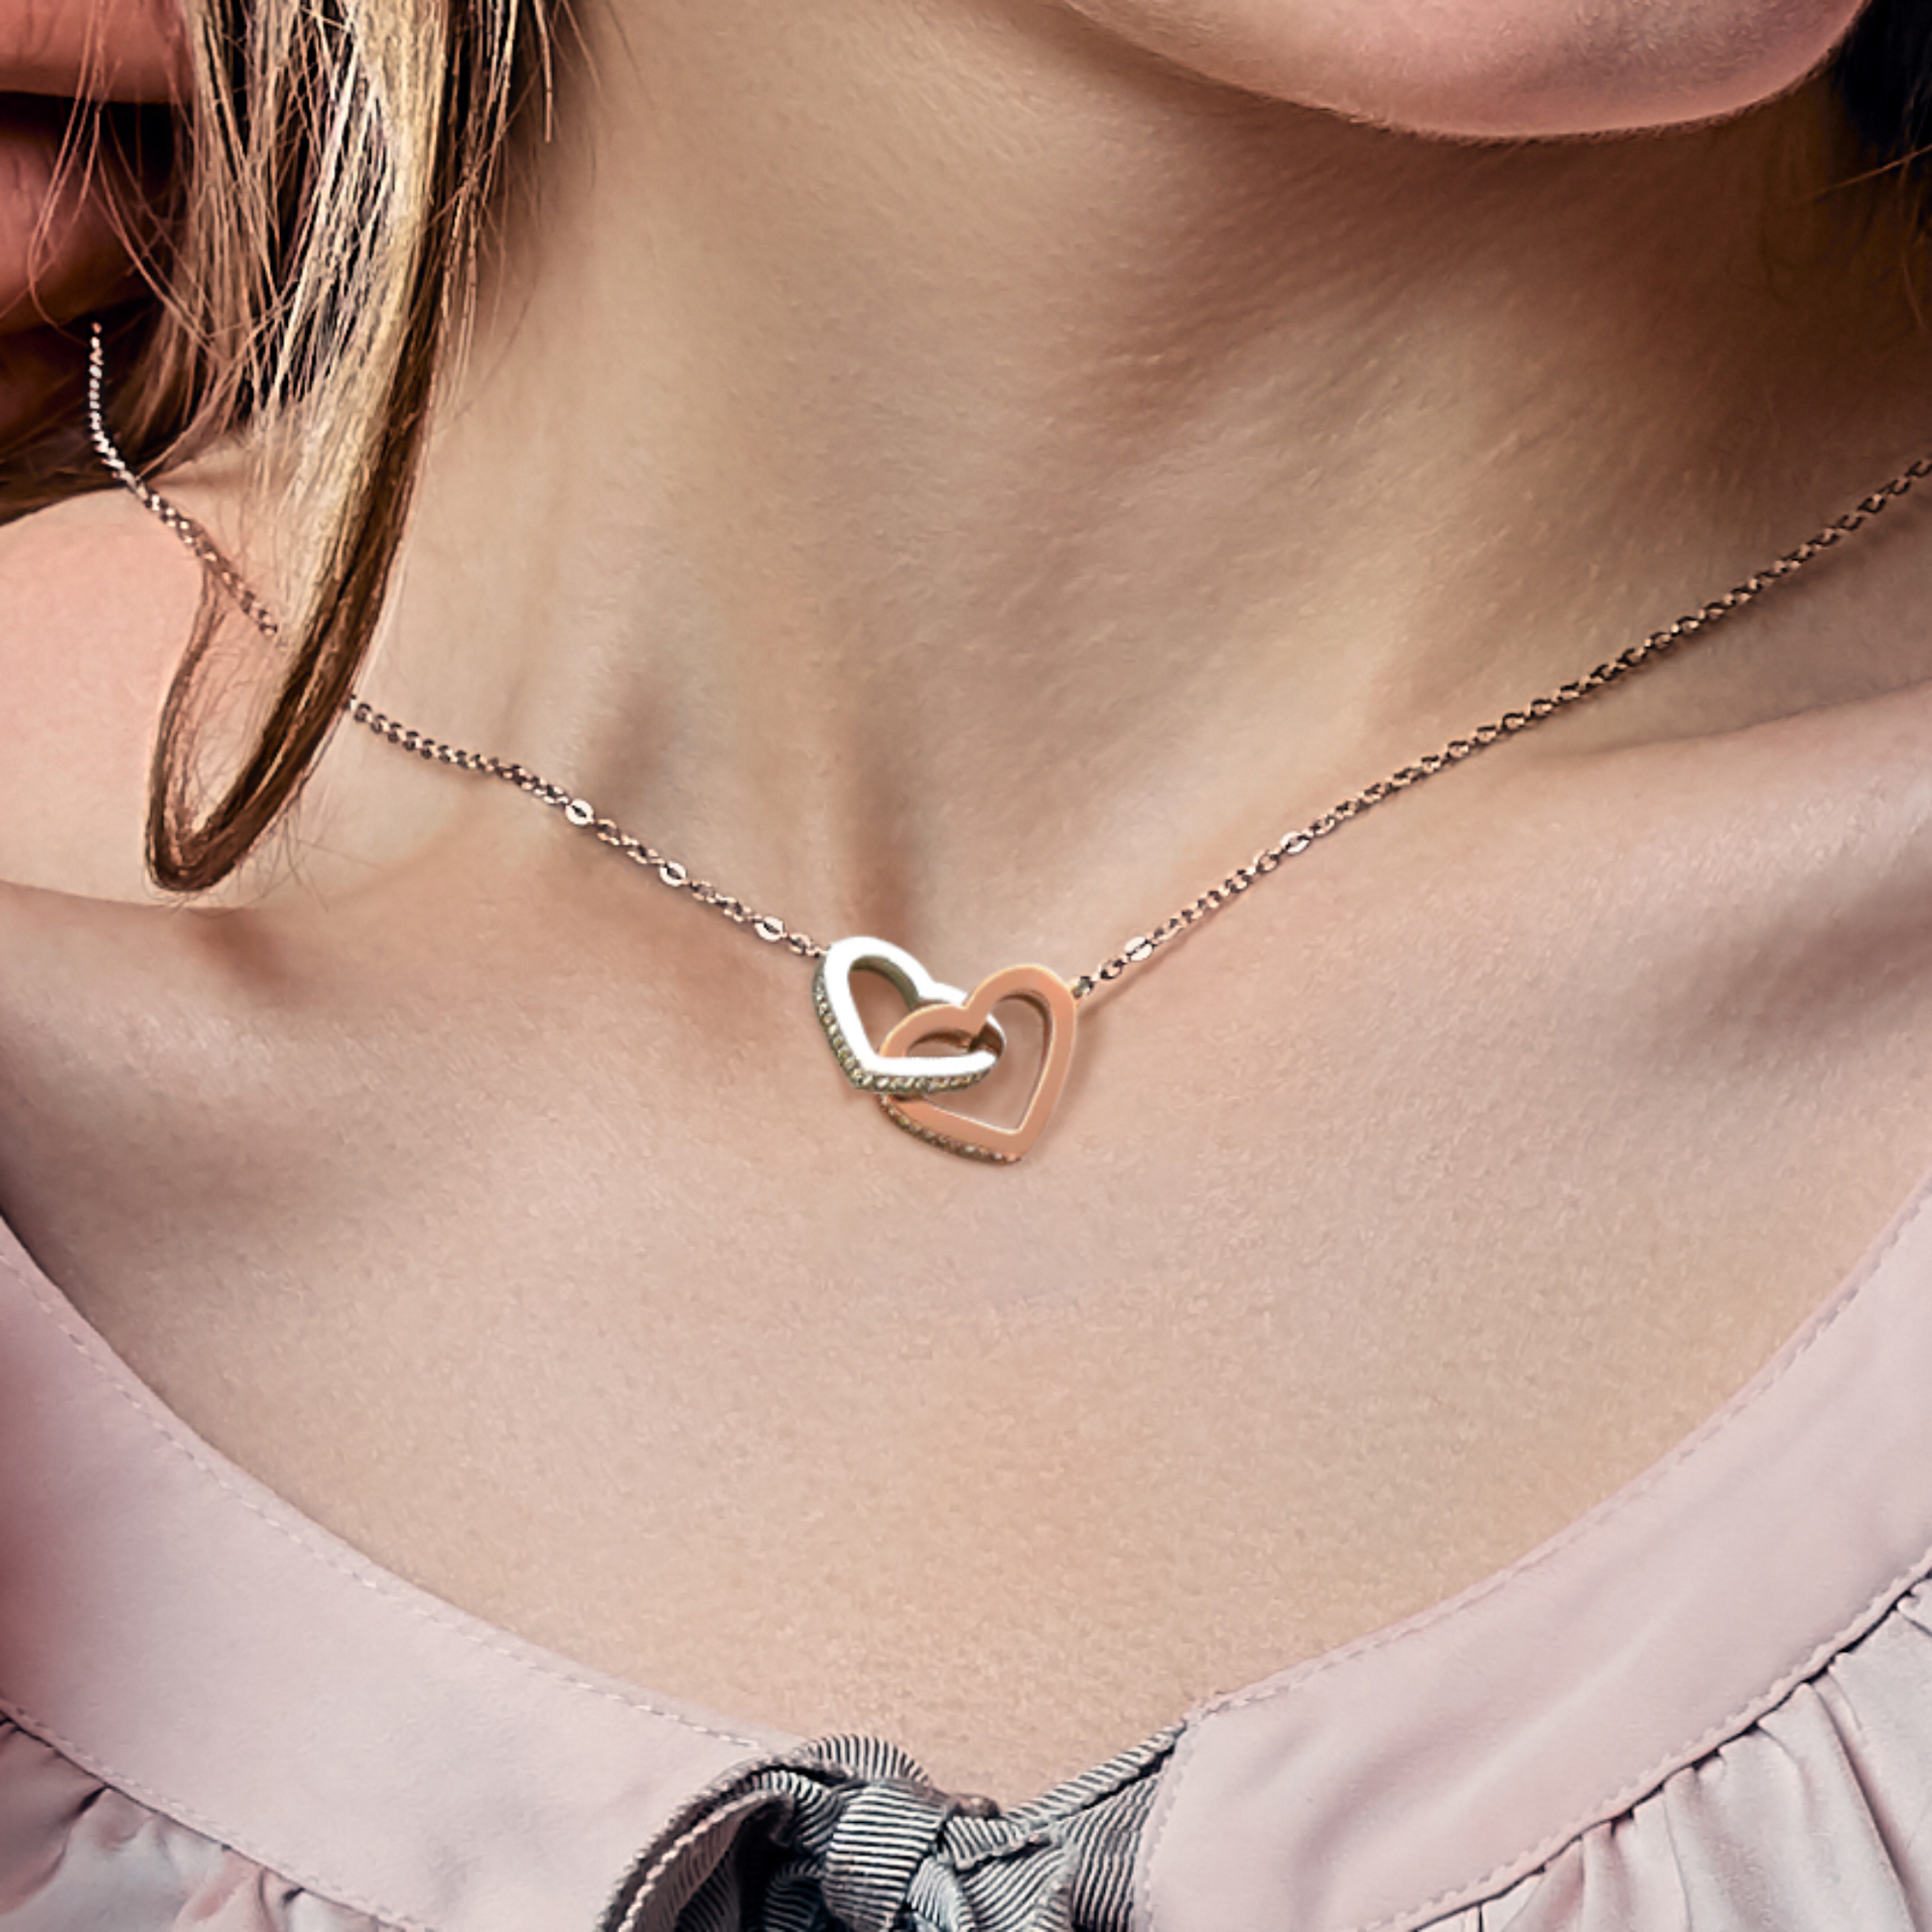 Interlocking Heart Necklace - Necklace for Granddaughter - Jewelry Inns